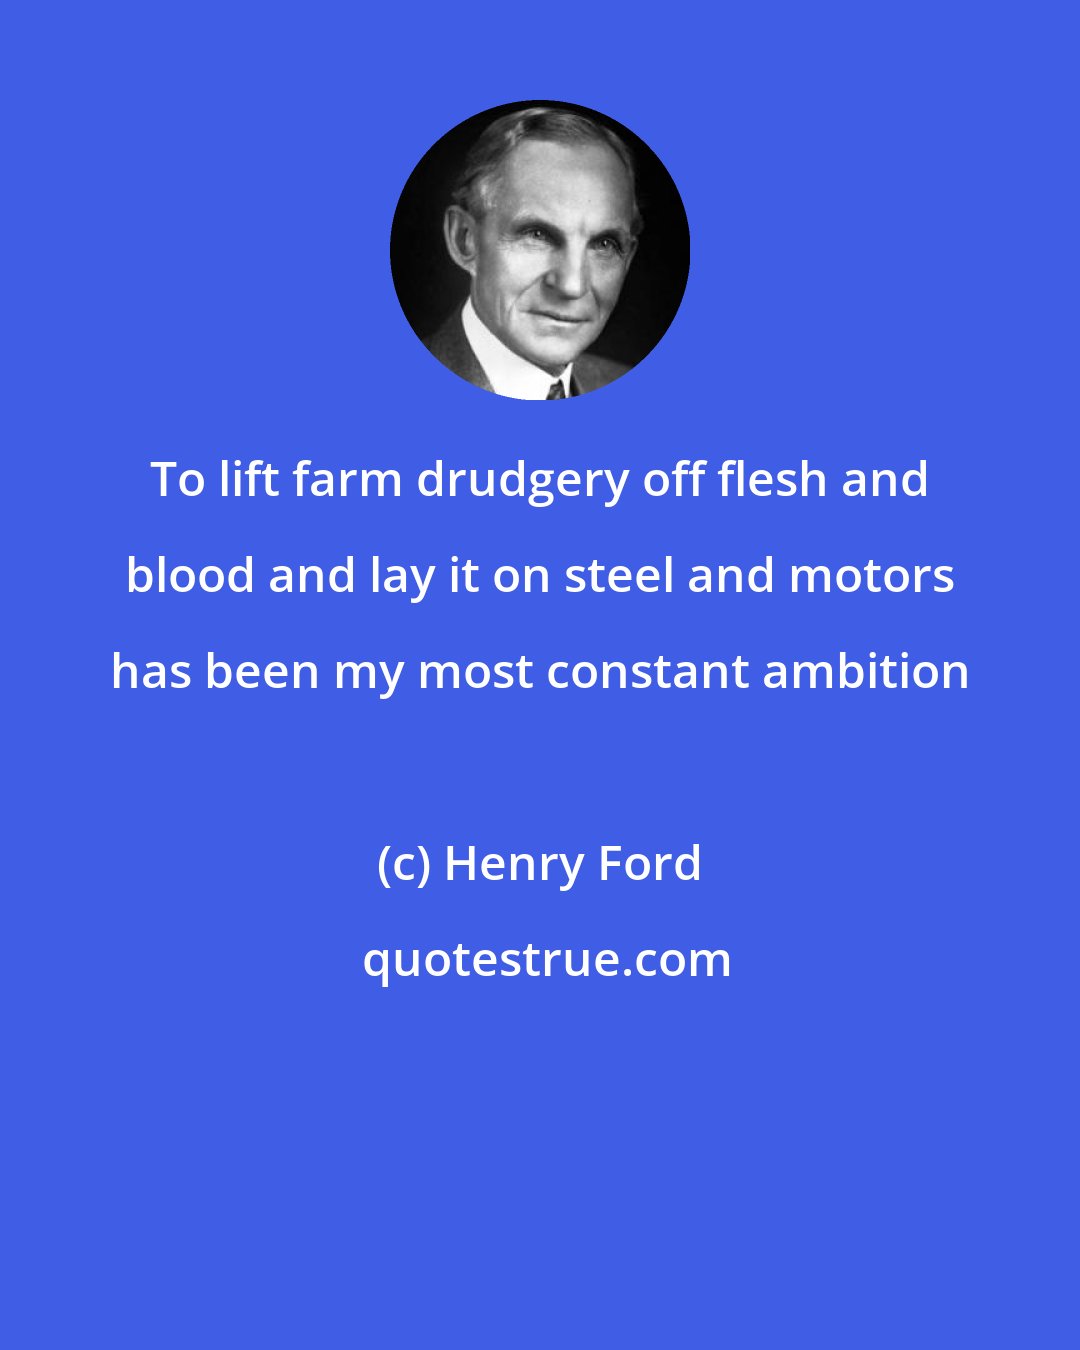 Henry Ford: To lift farm drudgery off flesh and blood and lay it on steel and motors has been my most constant ambition